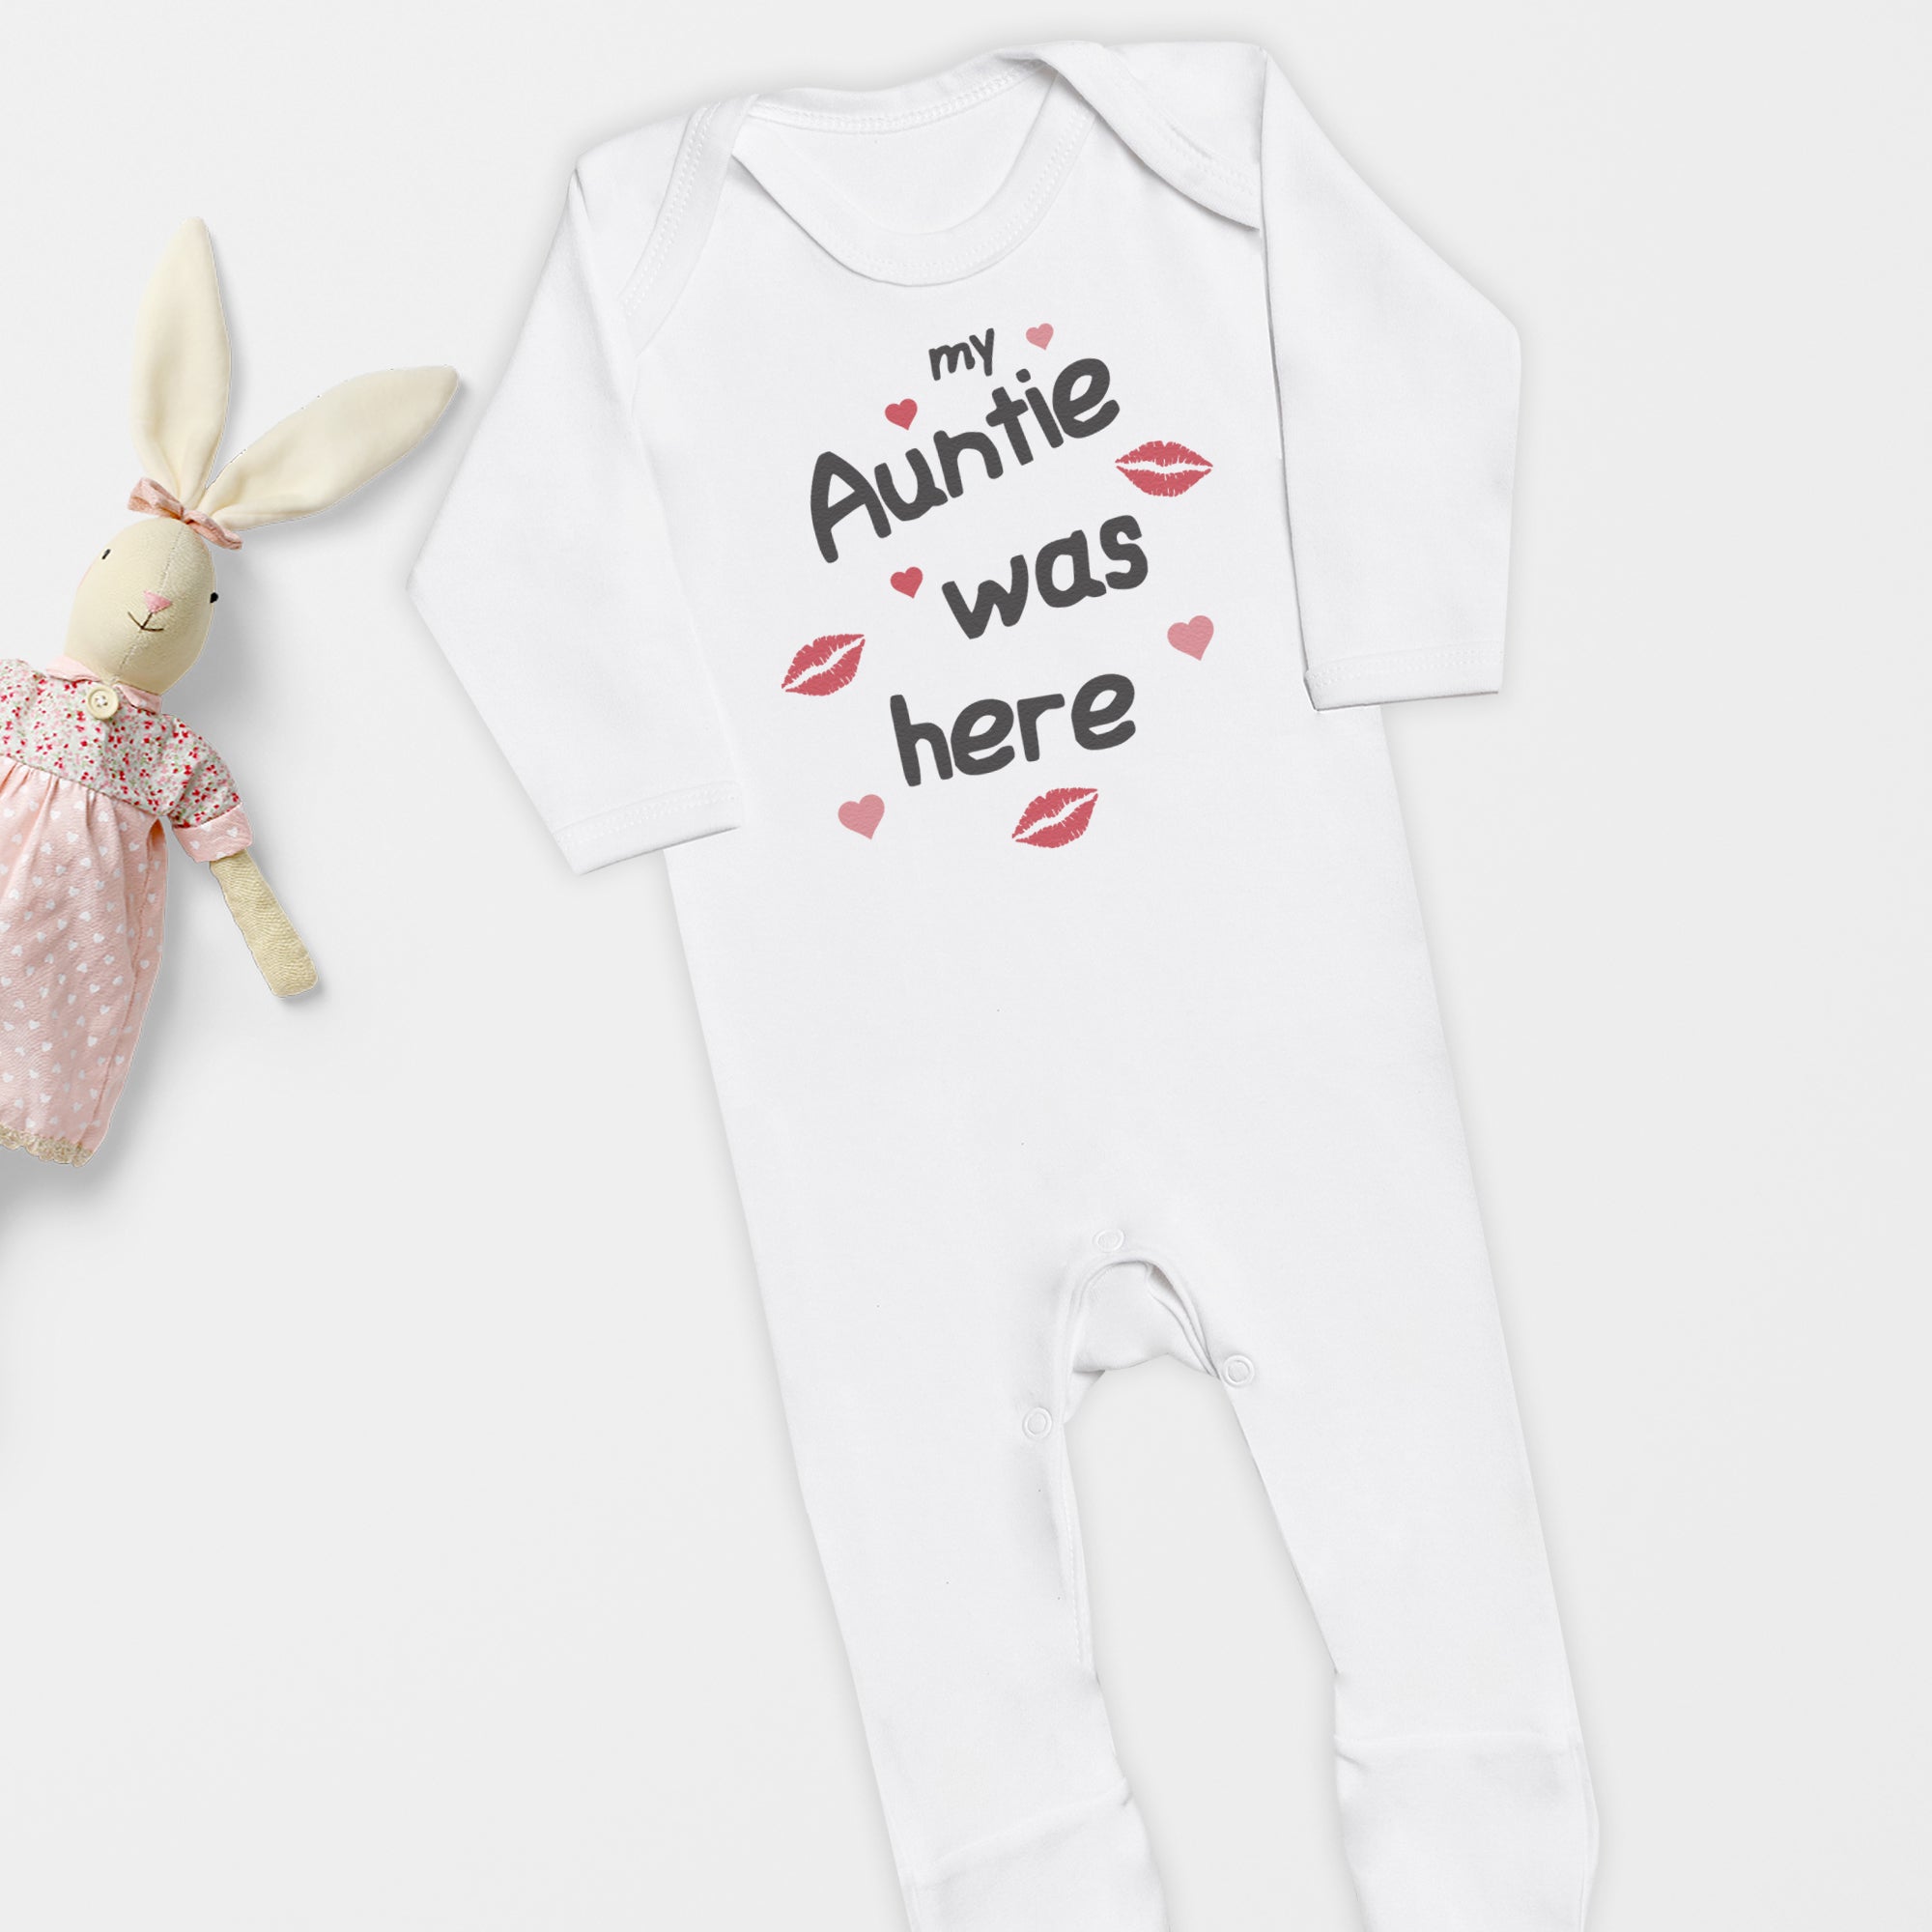 Pick A Family Name - Was Here Mummy, Auntie, Grandad Is My Superhero and more - Baby Romper